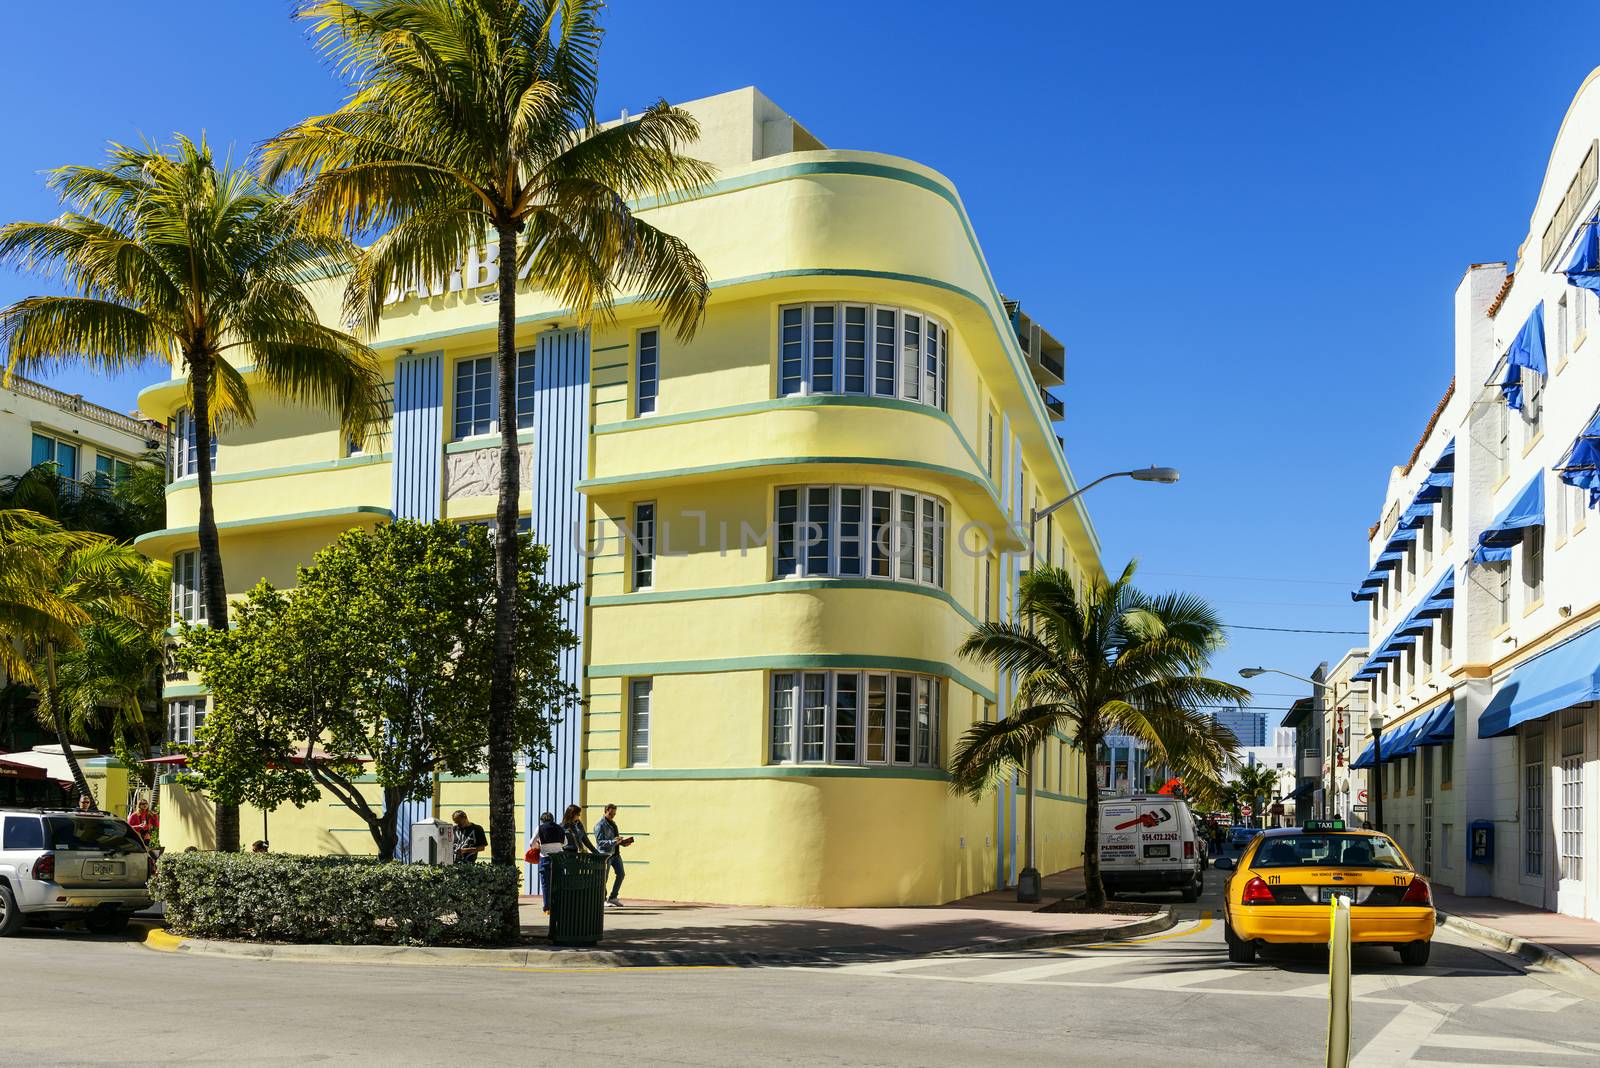 MIAMI SOUTH BEACH FLORIDA, USA - JANUARY 22: Ocean drive buildings january 22 2014 in Miami Beach, Florida. Art Deco architecture in South Beach is one of the main tourist attractions in Miami.